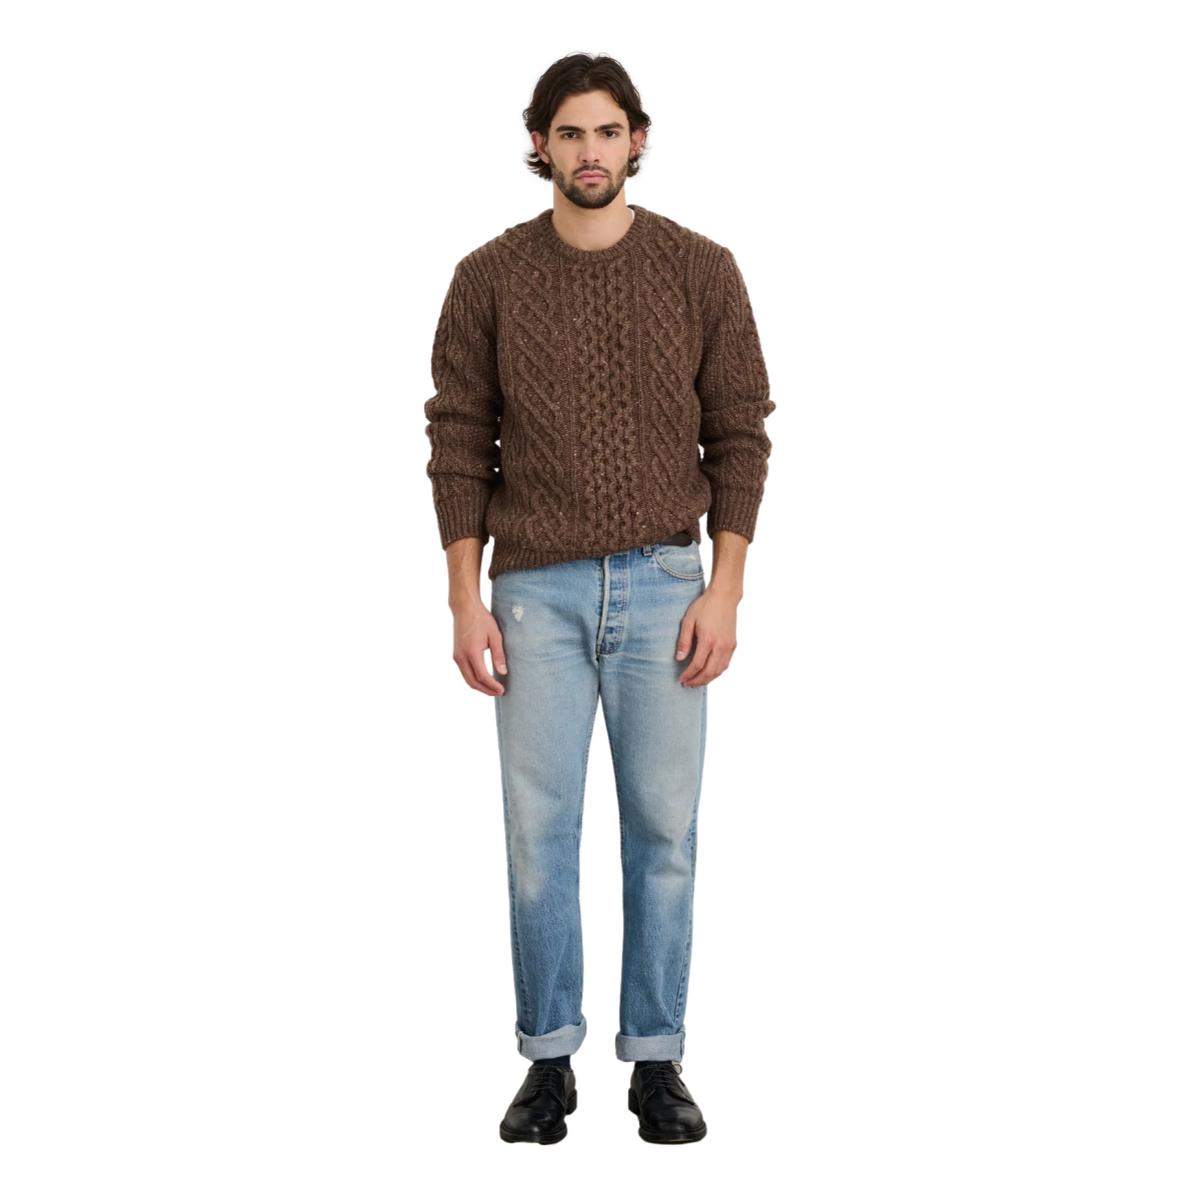 Fisherman Cable Crewneck Donegal Wool Coffee - Sweater